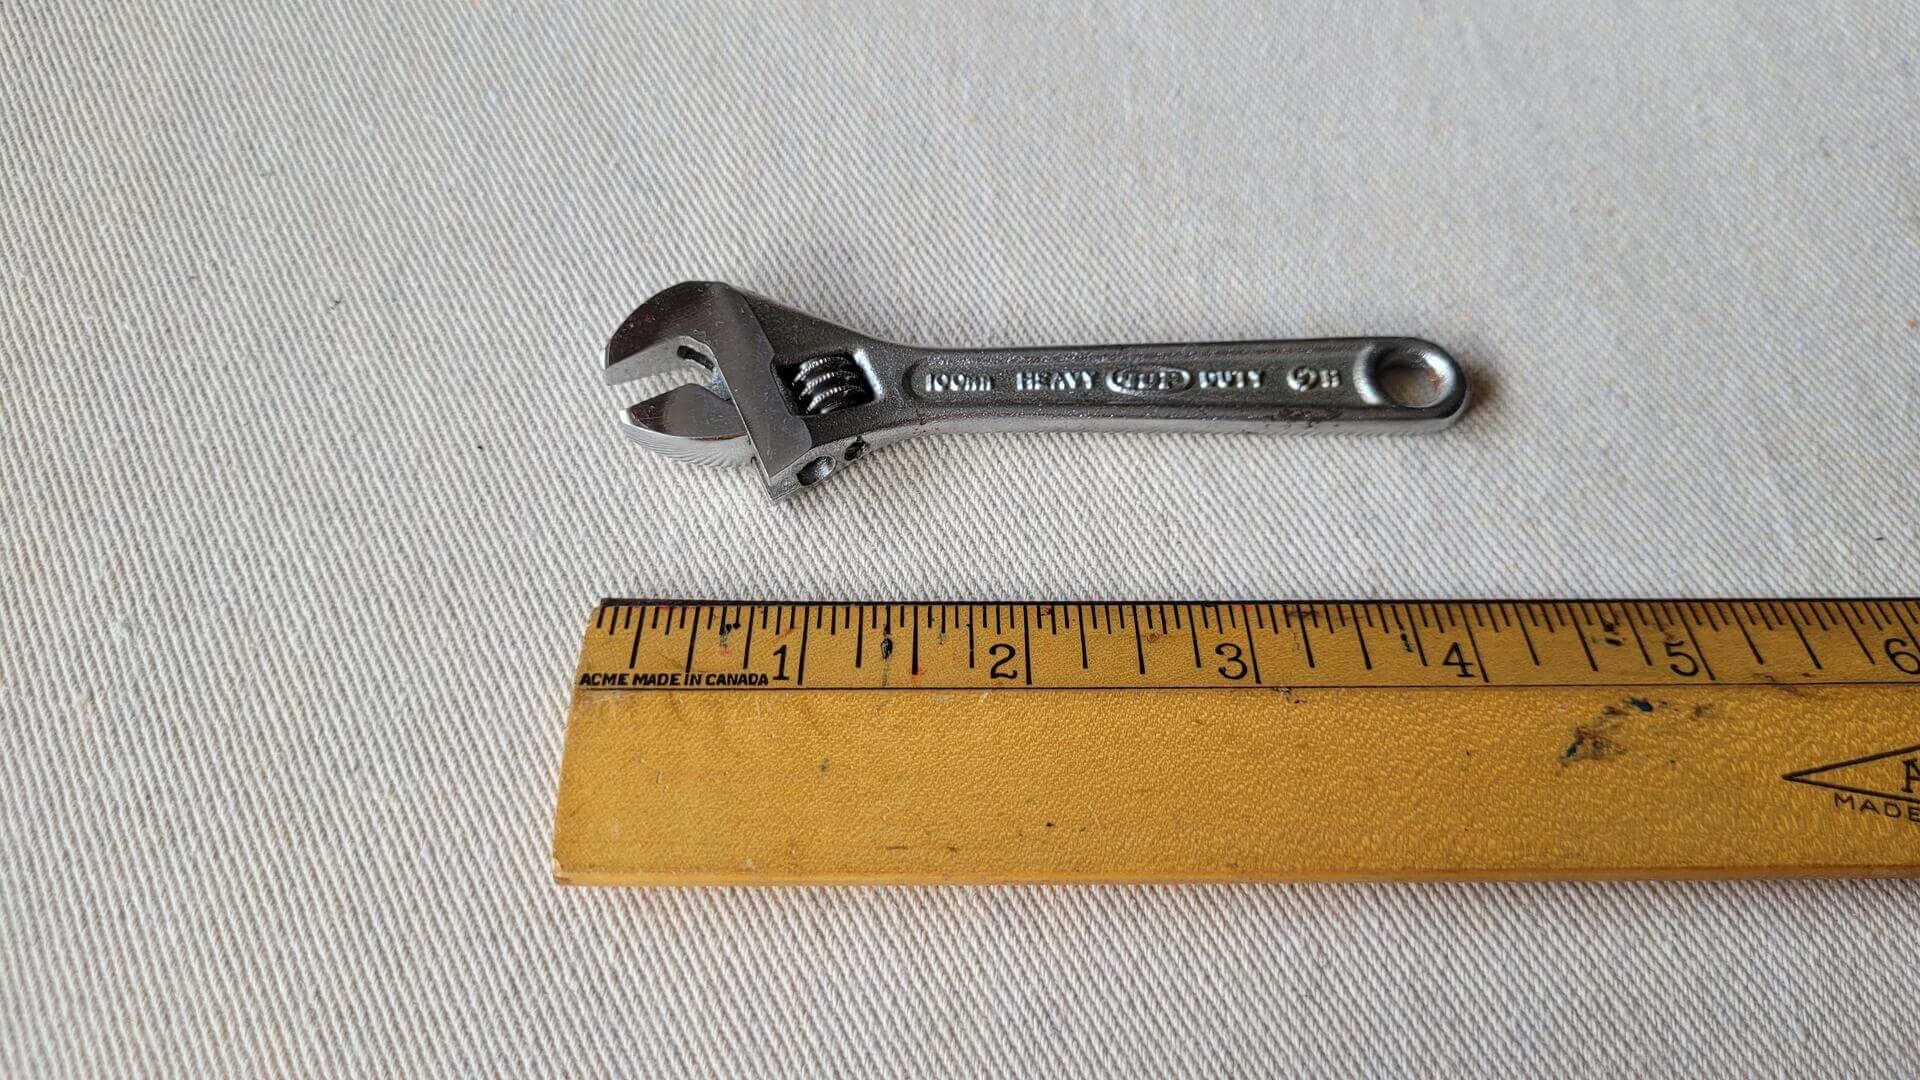 Heavy Duty model H-0100 adjustable wrench by Top 100mm / 4" long. Fine vintage made in Japan collectible pliers, shifting spanners & automotive hand tools